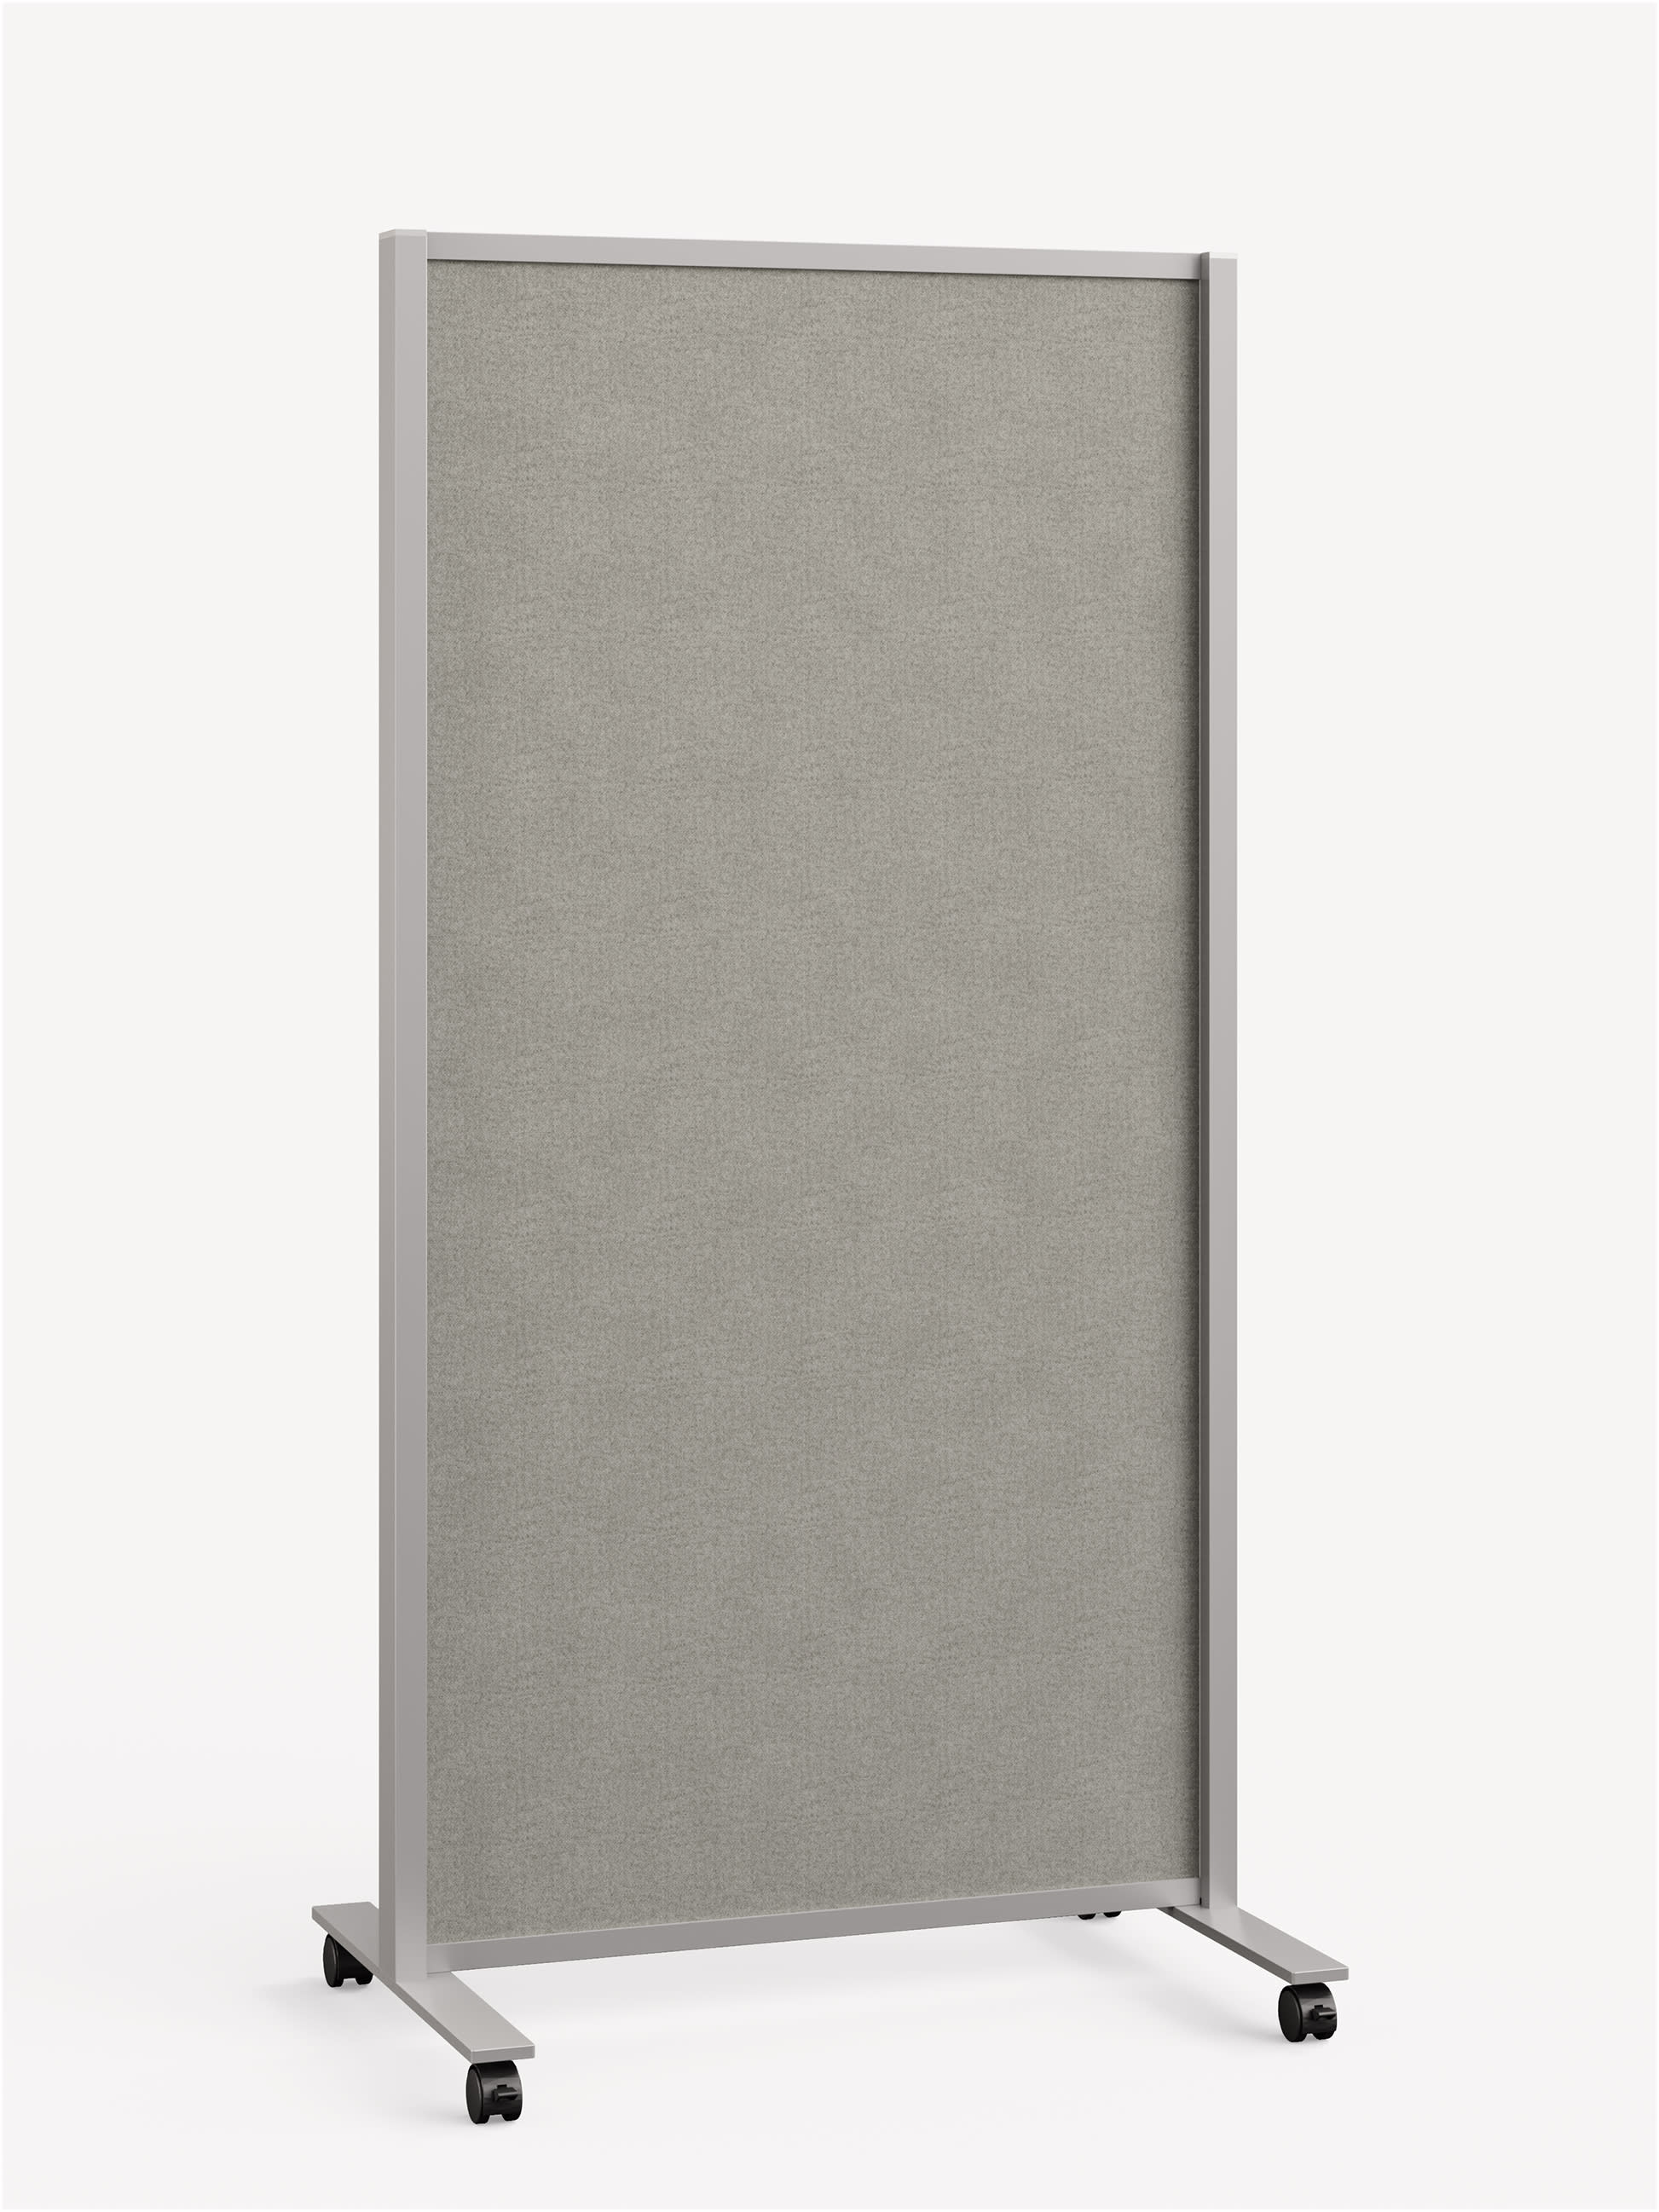 Three-quarter view of an Aware Two-Sided Mobile Tack board with a silver frame and platinum fabric.